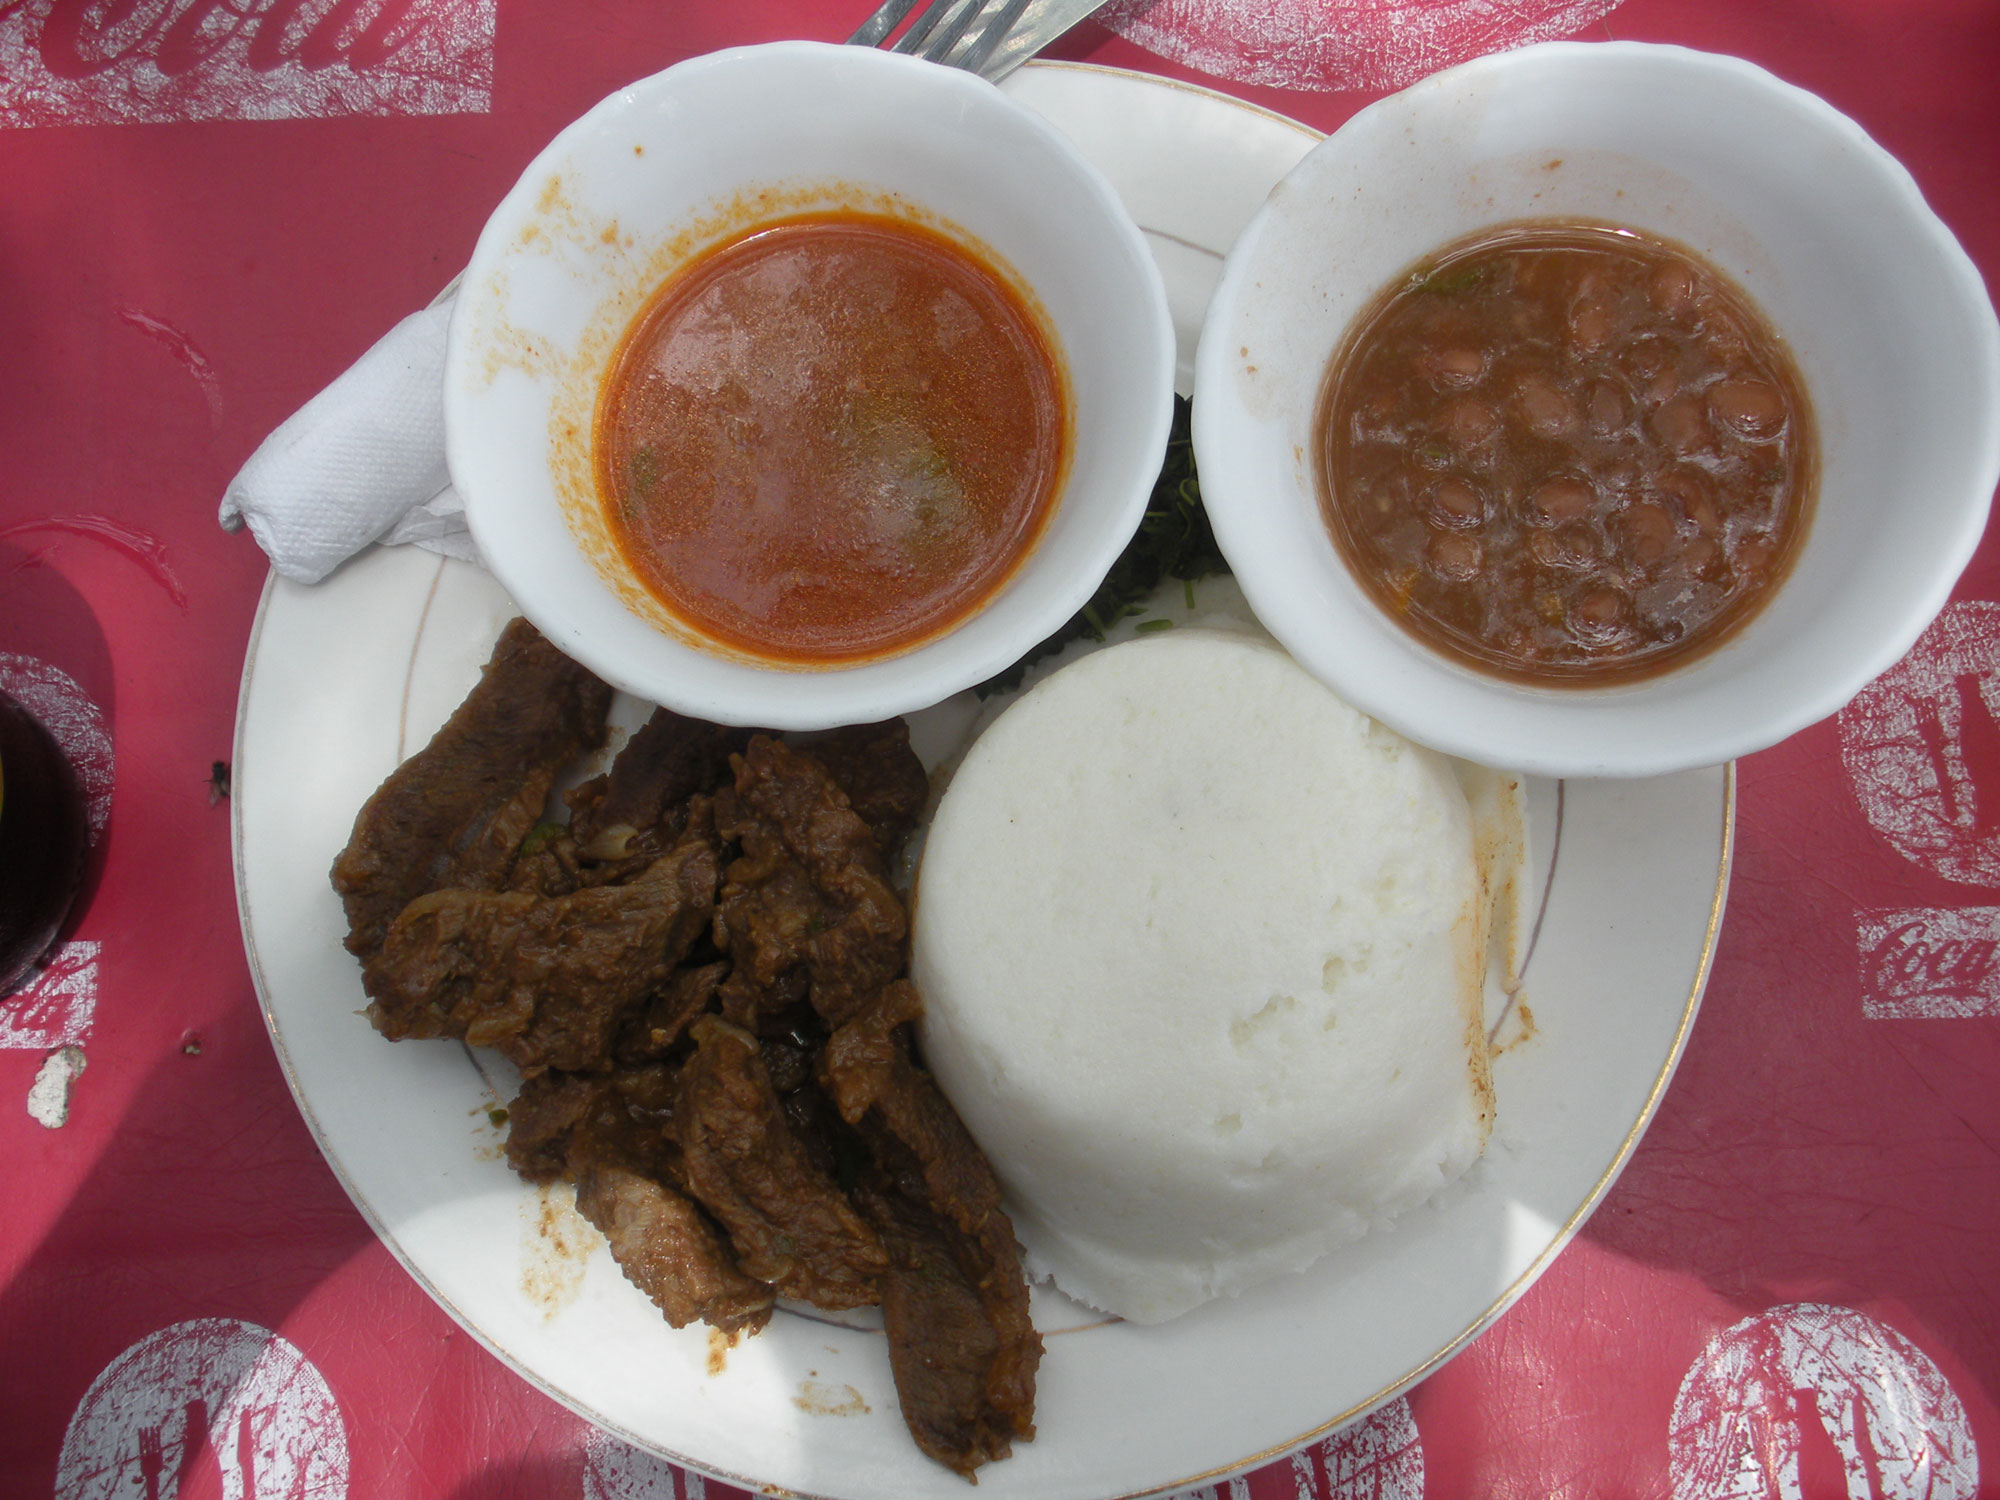 Photograph of a plate of food from Tanzania. The photo shows a white plate with pieces of beef, two bowls of sauce, and a lump of cornmeal on it.